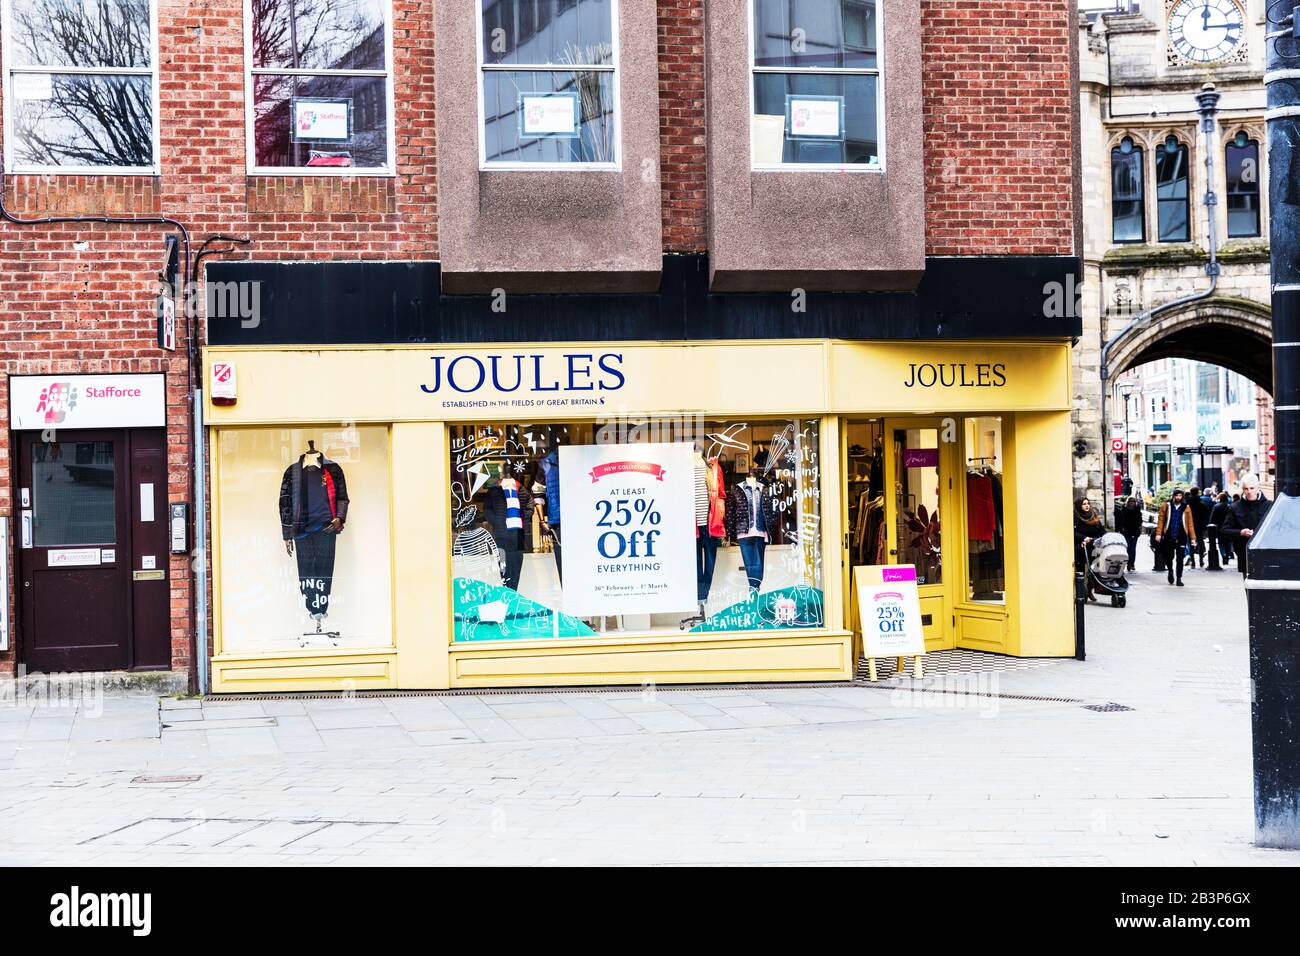 Joules clothing store, joules clothing, joules shop, joules, joules  clothes, Lincoln City, UK, England, logo, sign, store, shop Stock Photo -  Alamy